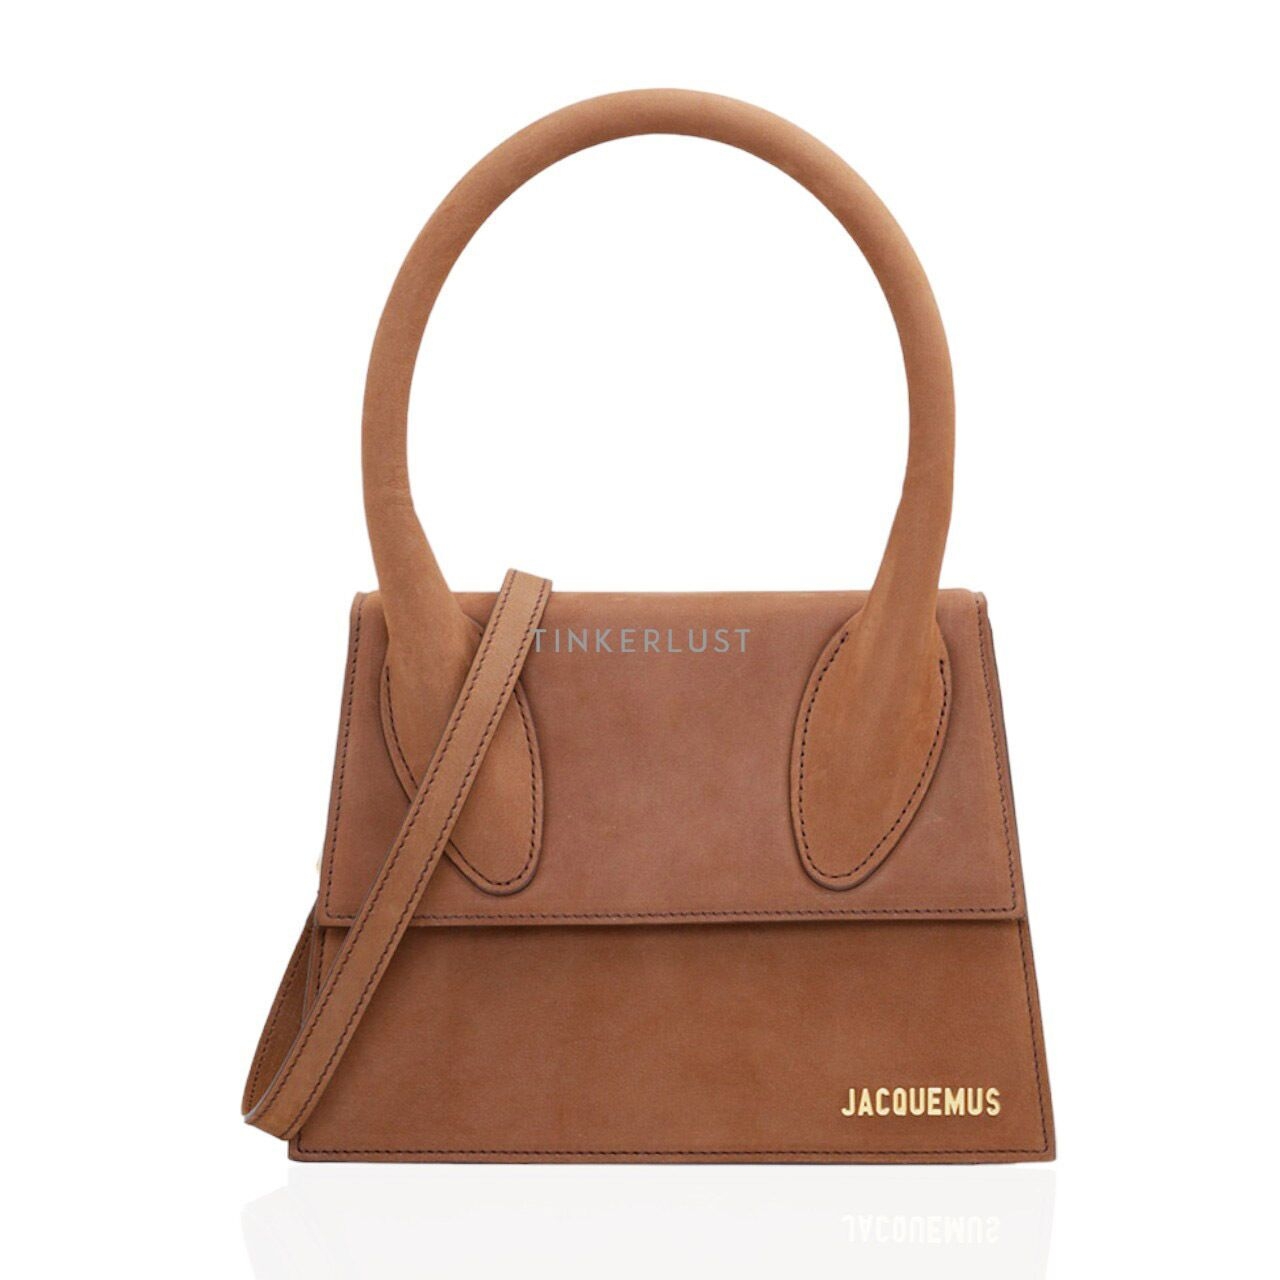 Jacquemus Le Grand Chiquito in Brown Structured Water-Repellent Satchel Bag